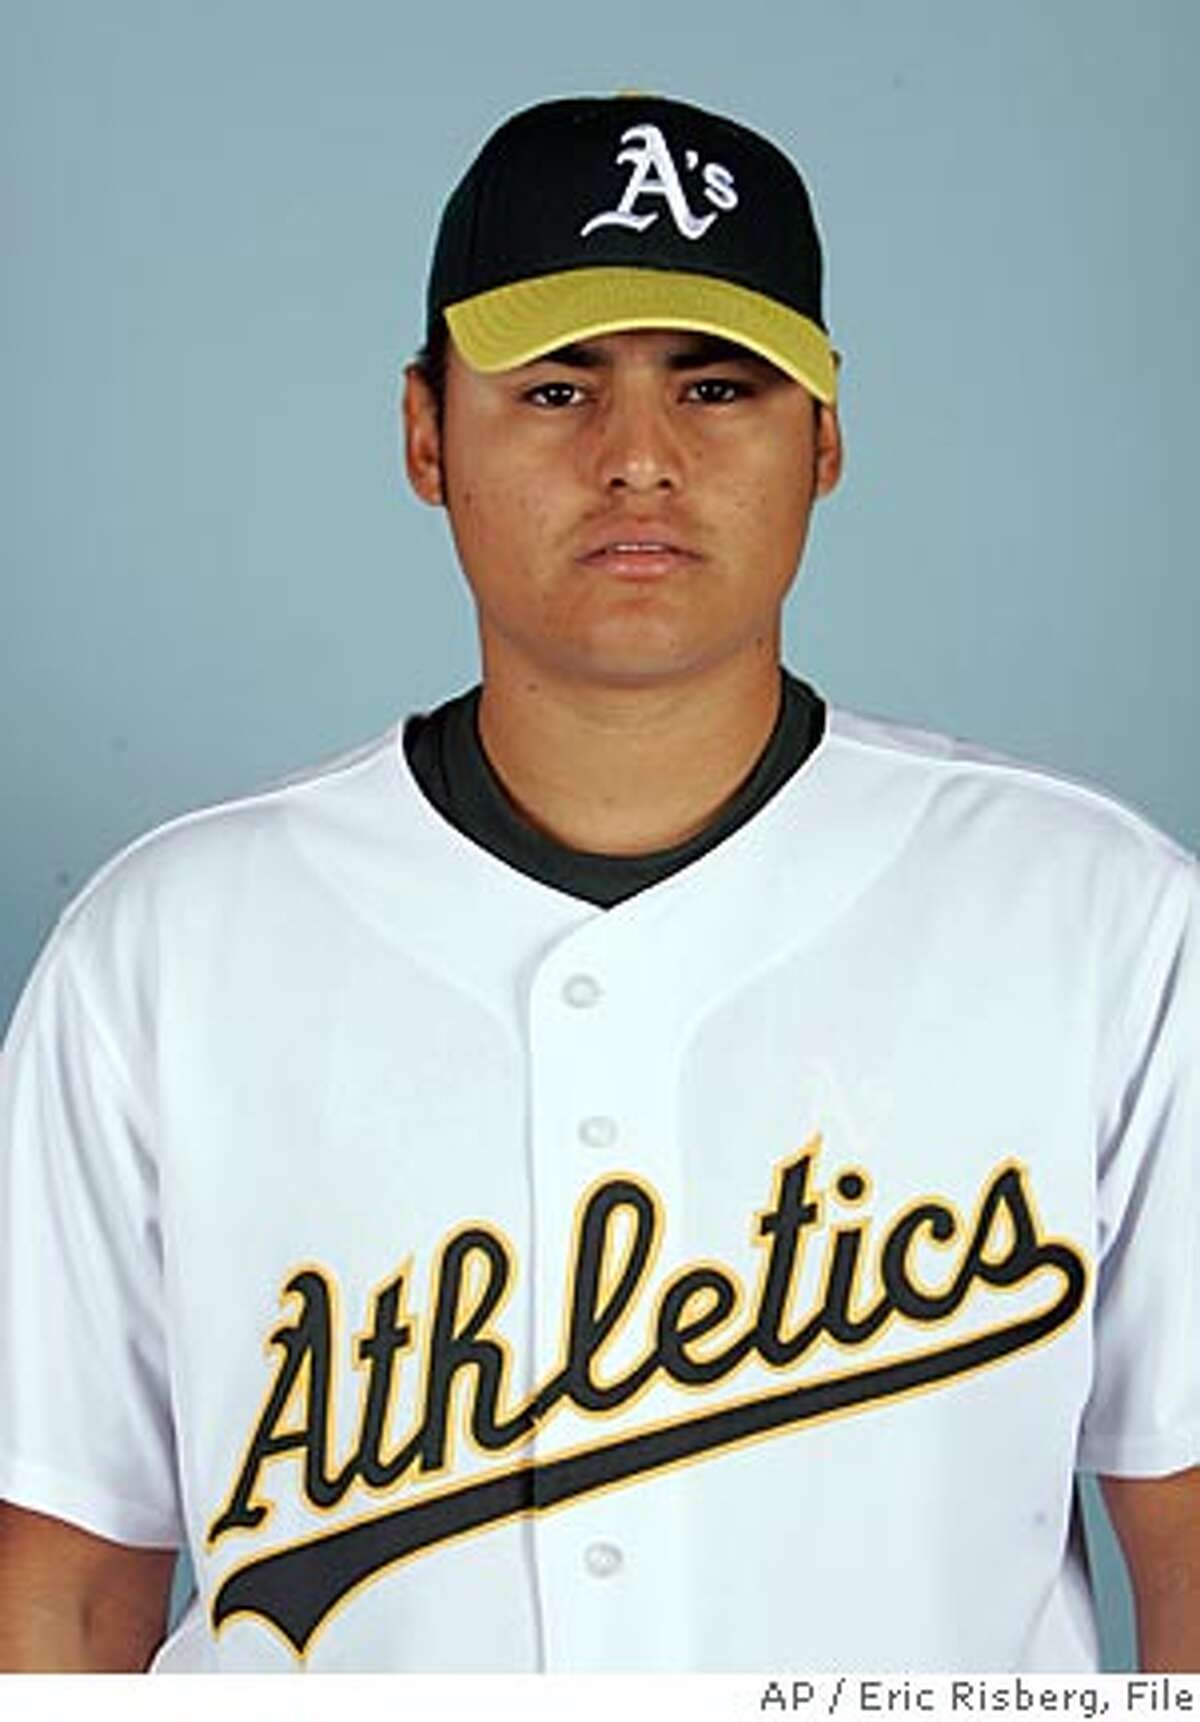 This is a 2008 file photo of Arnold Leon of the Oakland A's baseball team. This image reflects the A's active roster as of Monday, Feb. 25, 2008 when this photo was taken. (AP Photo/Eric Risberg) Ran on: 03-02-2008 Arnold Leon, a 19-year-old from Mexico, has been impressive this spring. Ran on: 03-02-2008